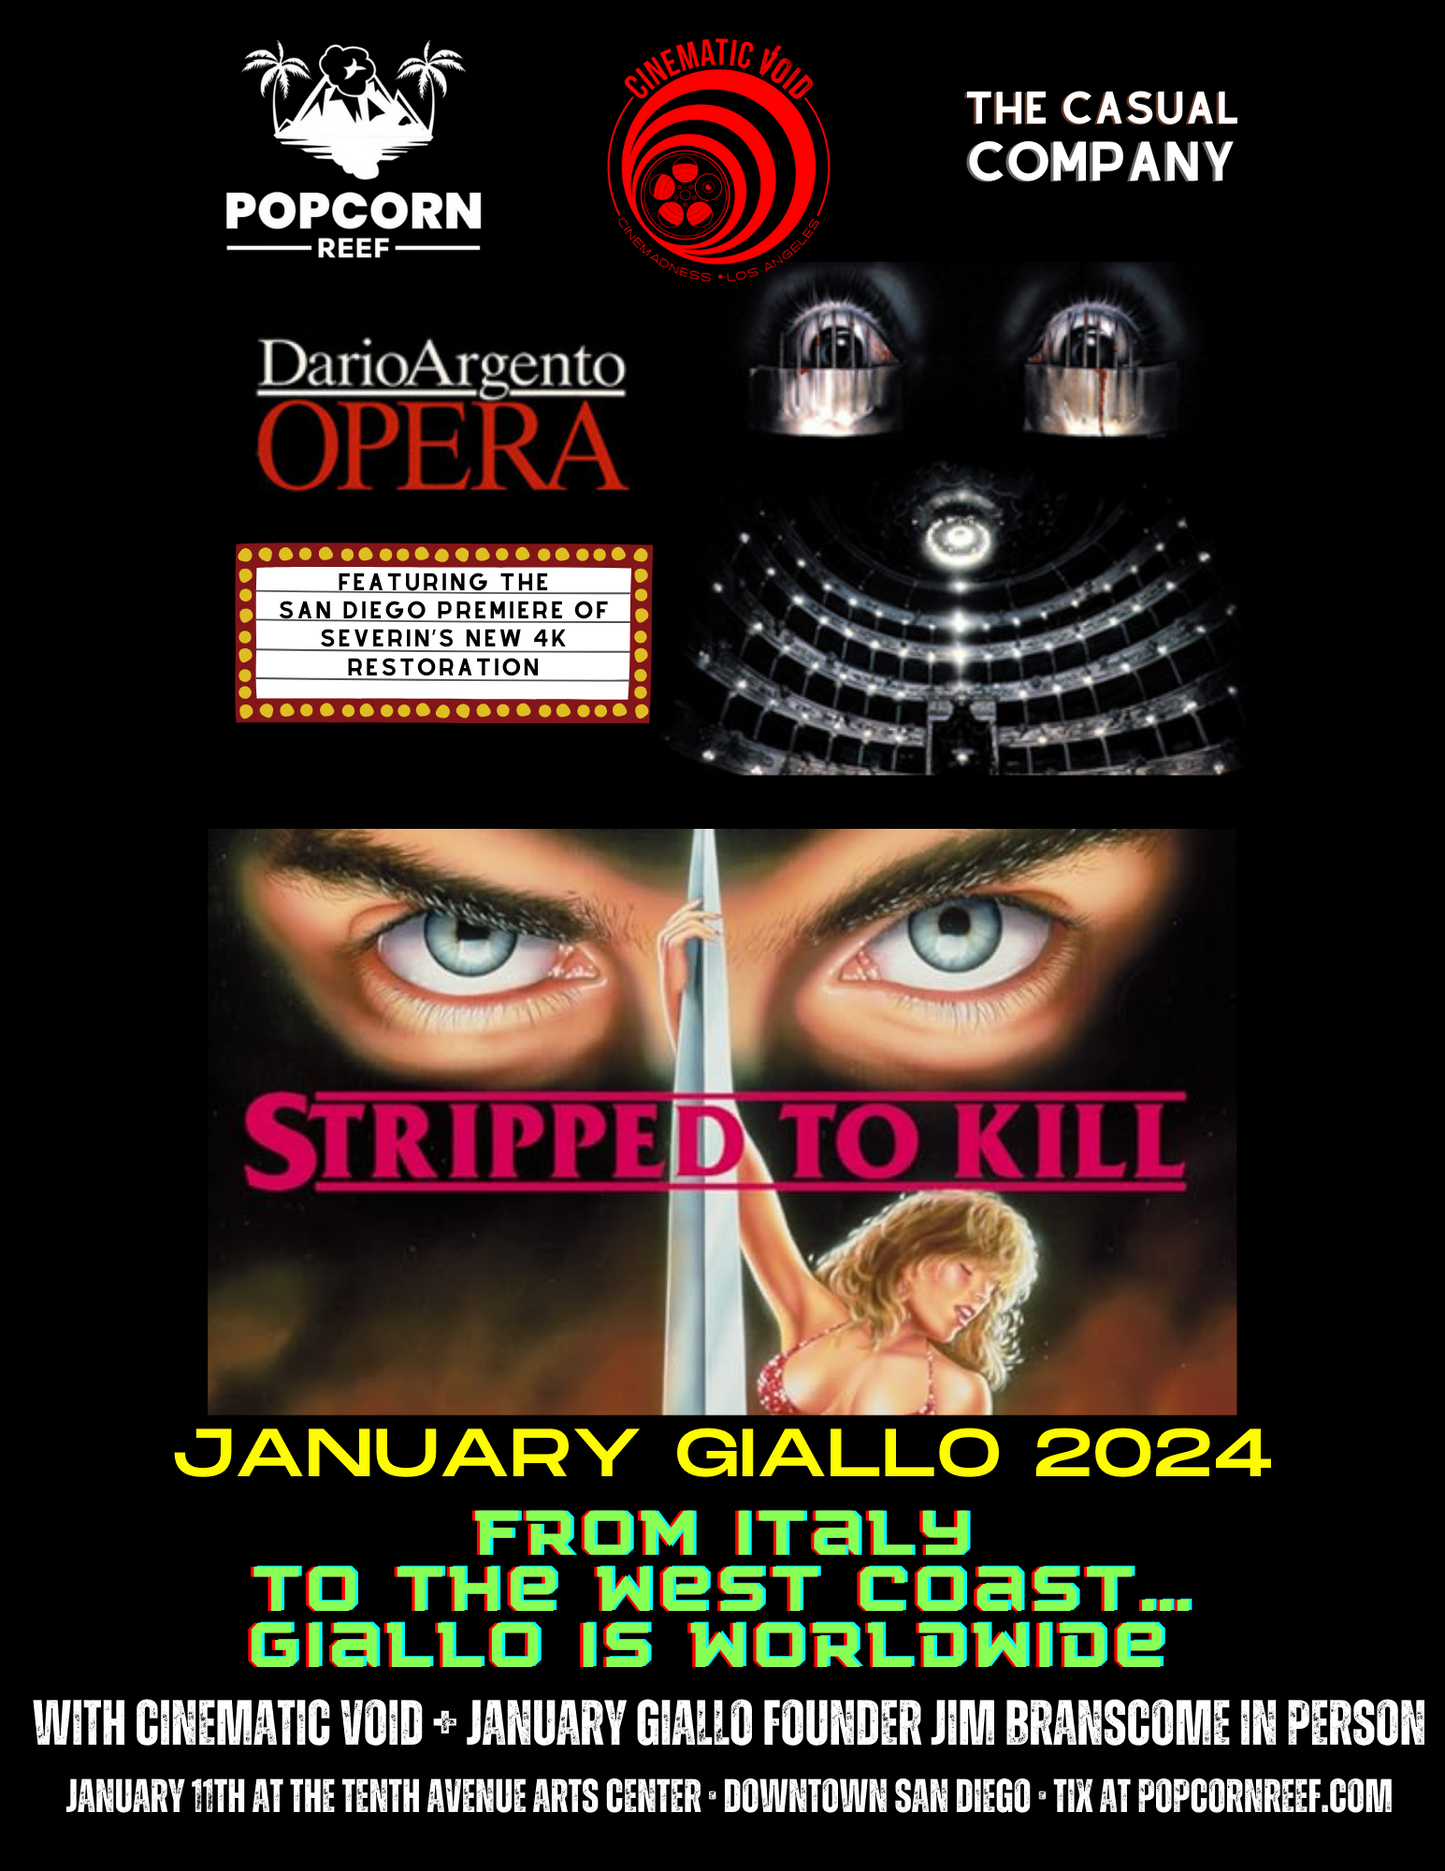 Screening: January Giallo 2024 with Cinematic Void Founder Jim Branscome In-Person, OPERA, and STRIPPED TO KILL at The Tenth Avenue Arts Center [1/11/24]